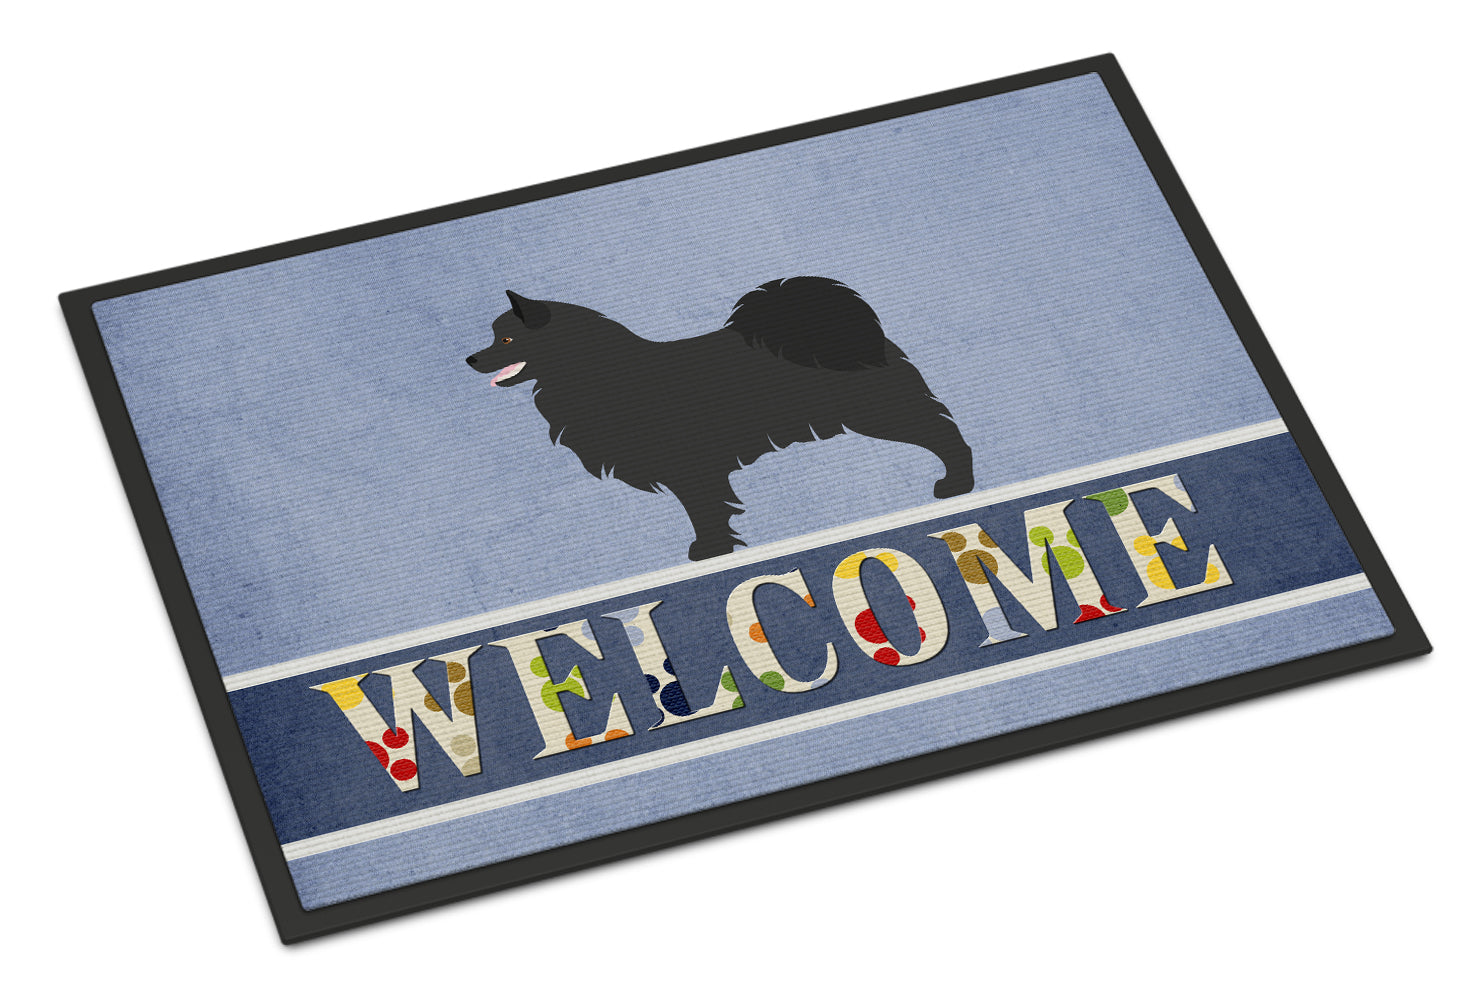 Swedish Lapphund Welcome Indoor or Outdoor Mat 18x27 BB8347MAT - the-store.com